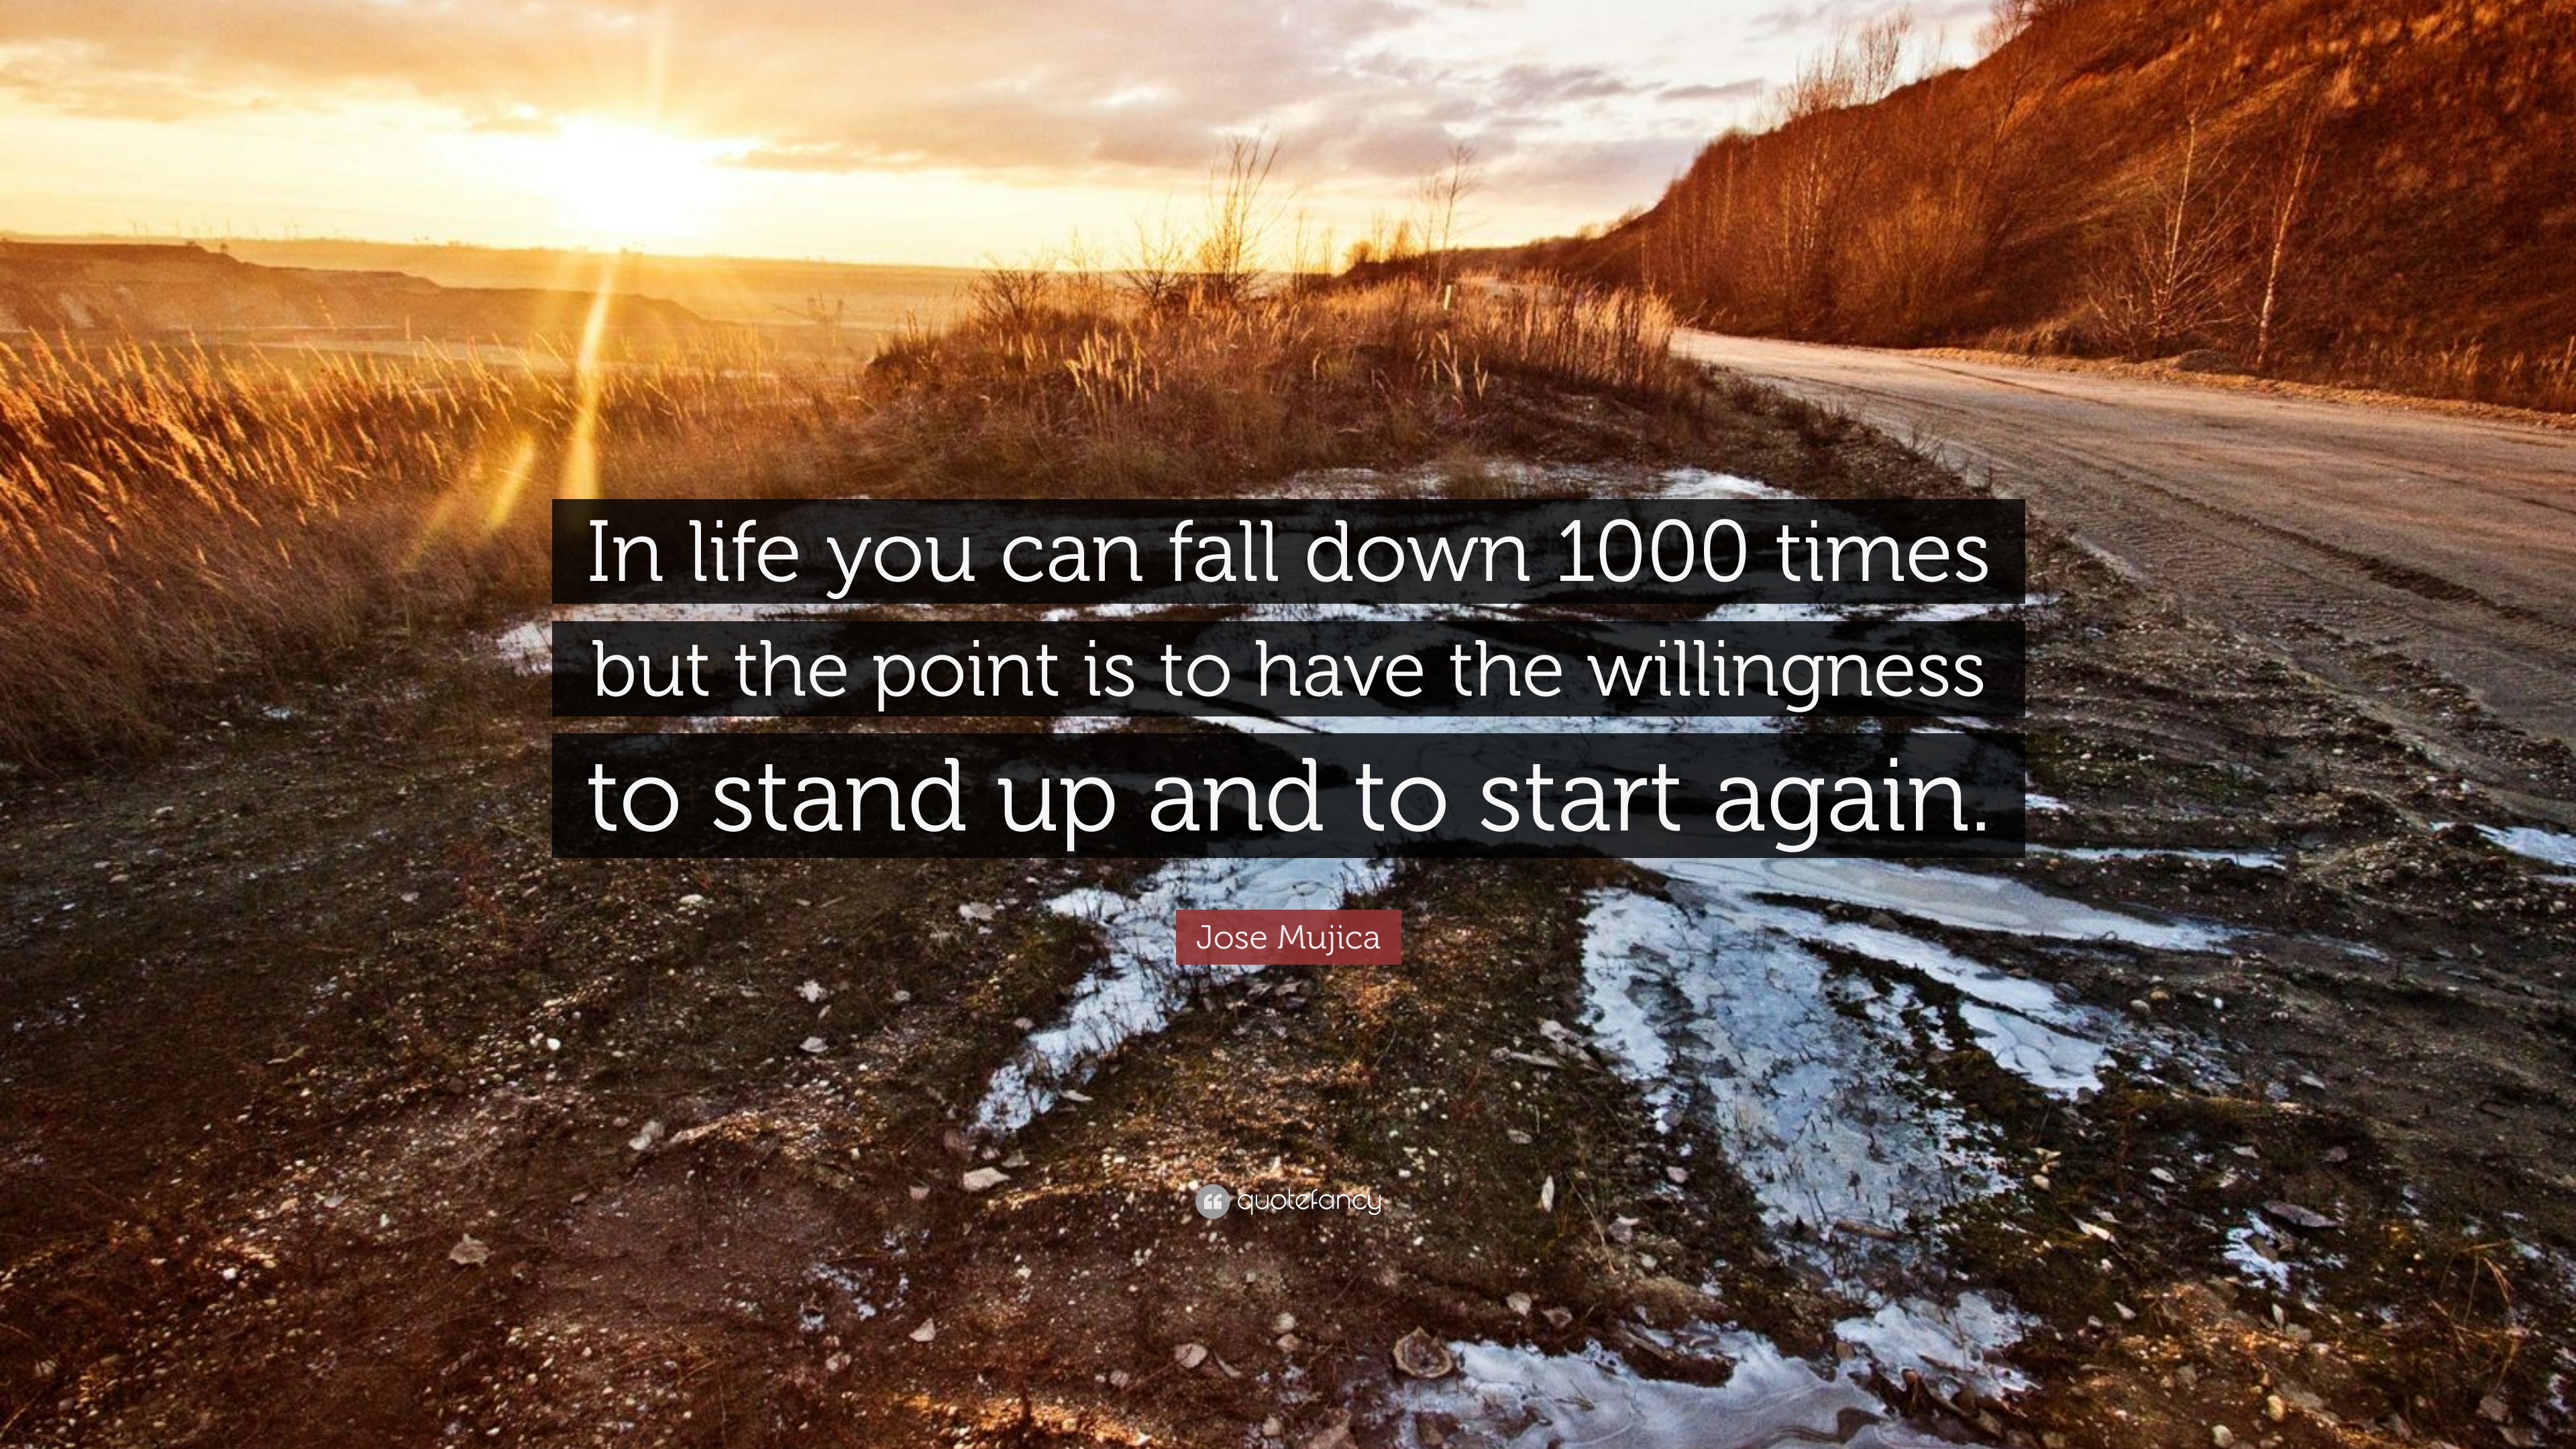 Jose Mujica Quote: “In life you can fall down 1000 times but the point is to